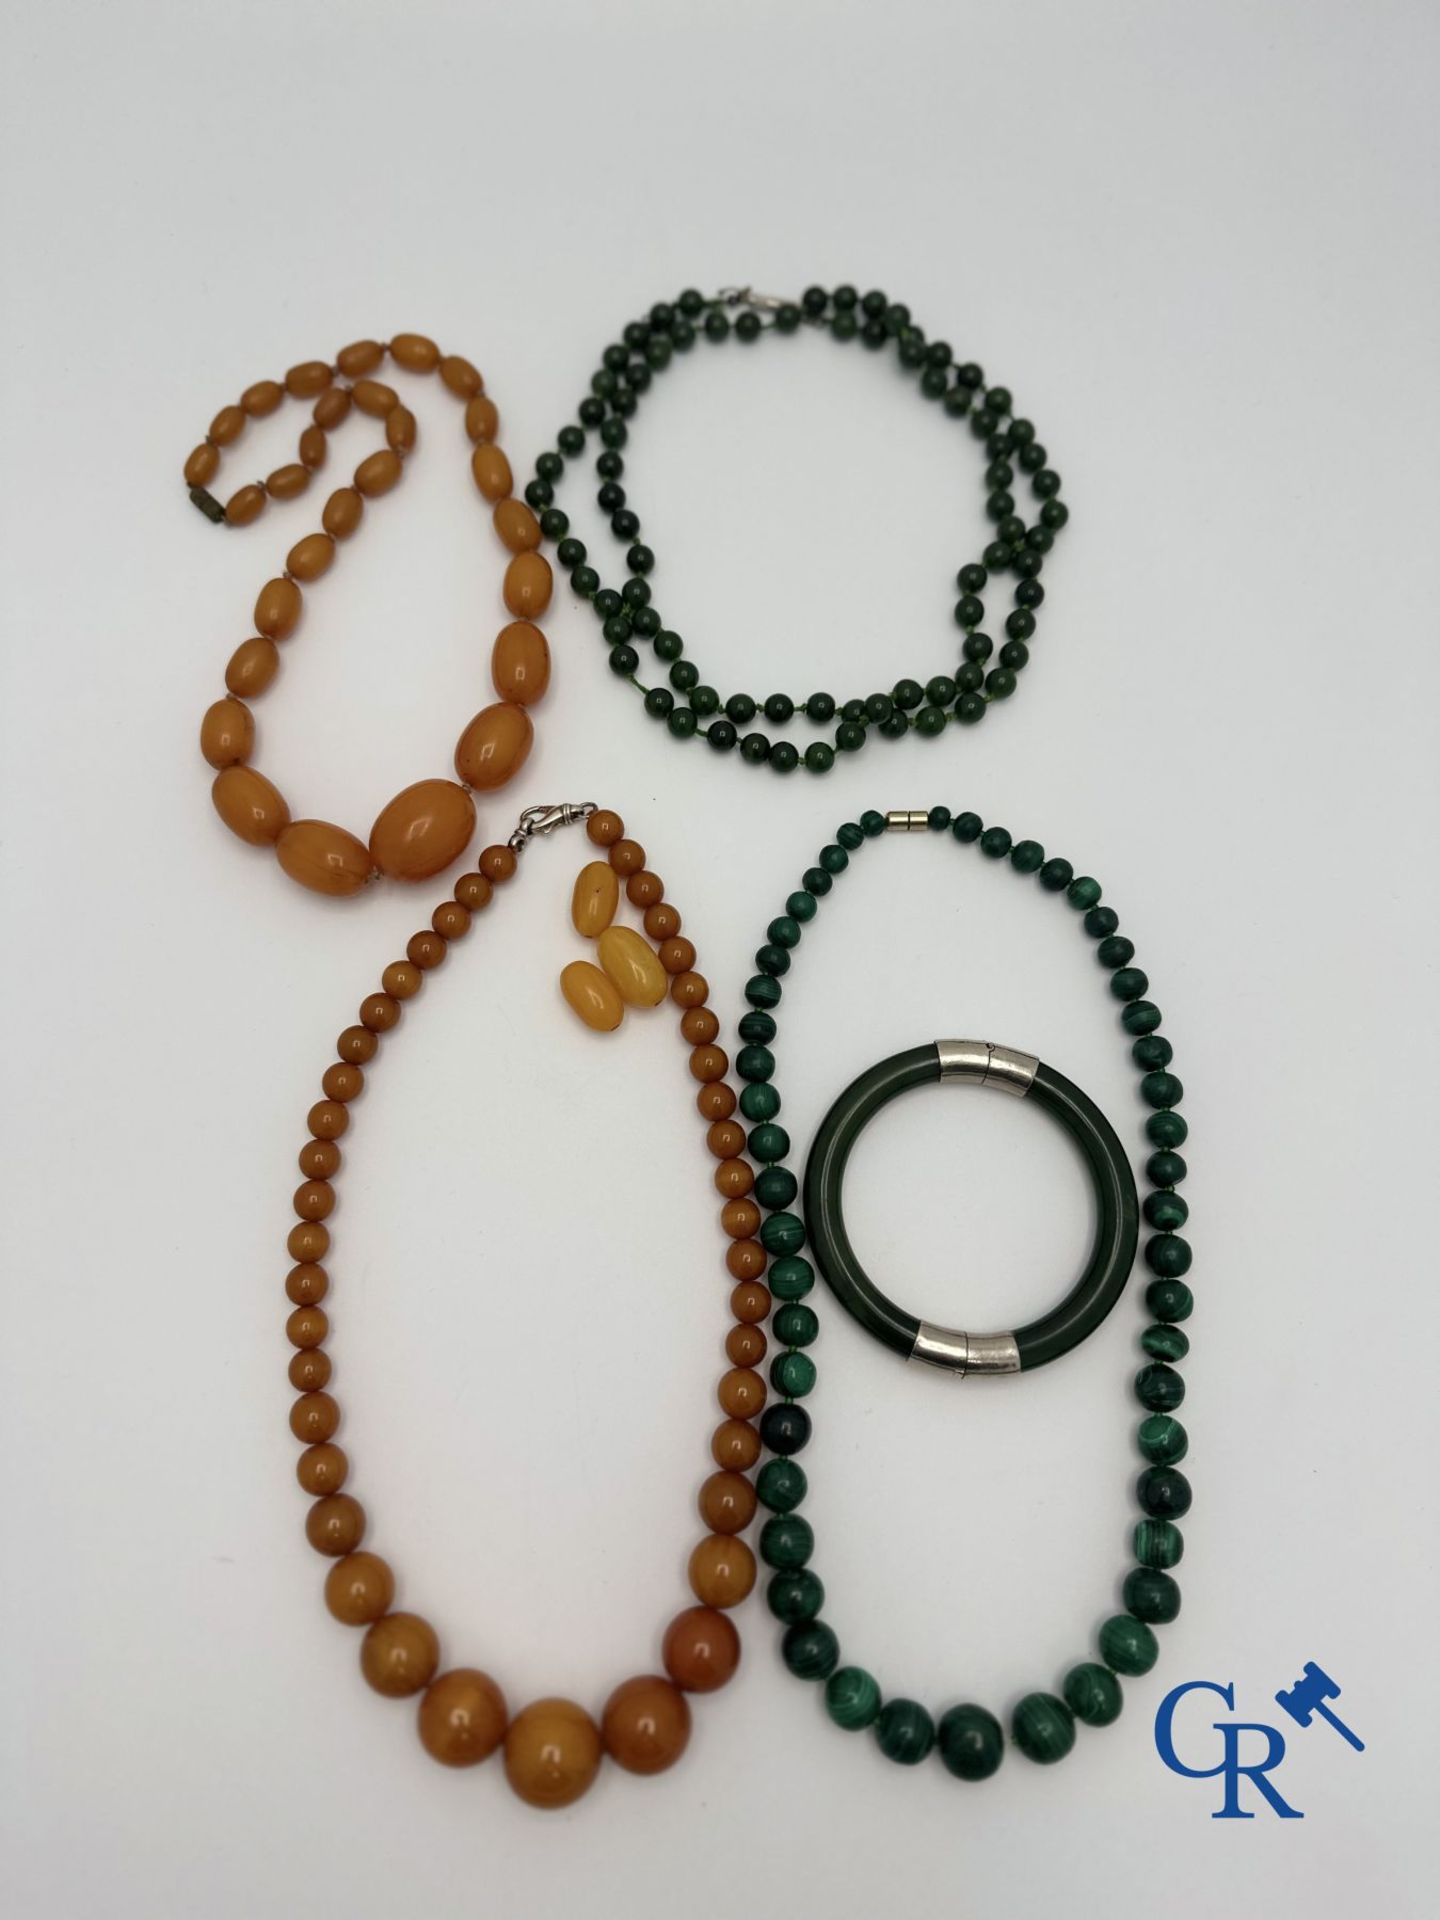 Jewellery: Lot consisting of jewellery made of jade, malachite and imitation amber. - Image 2 of 2